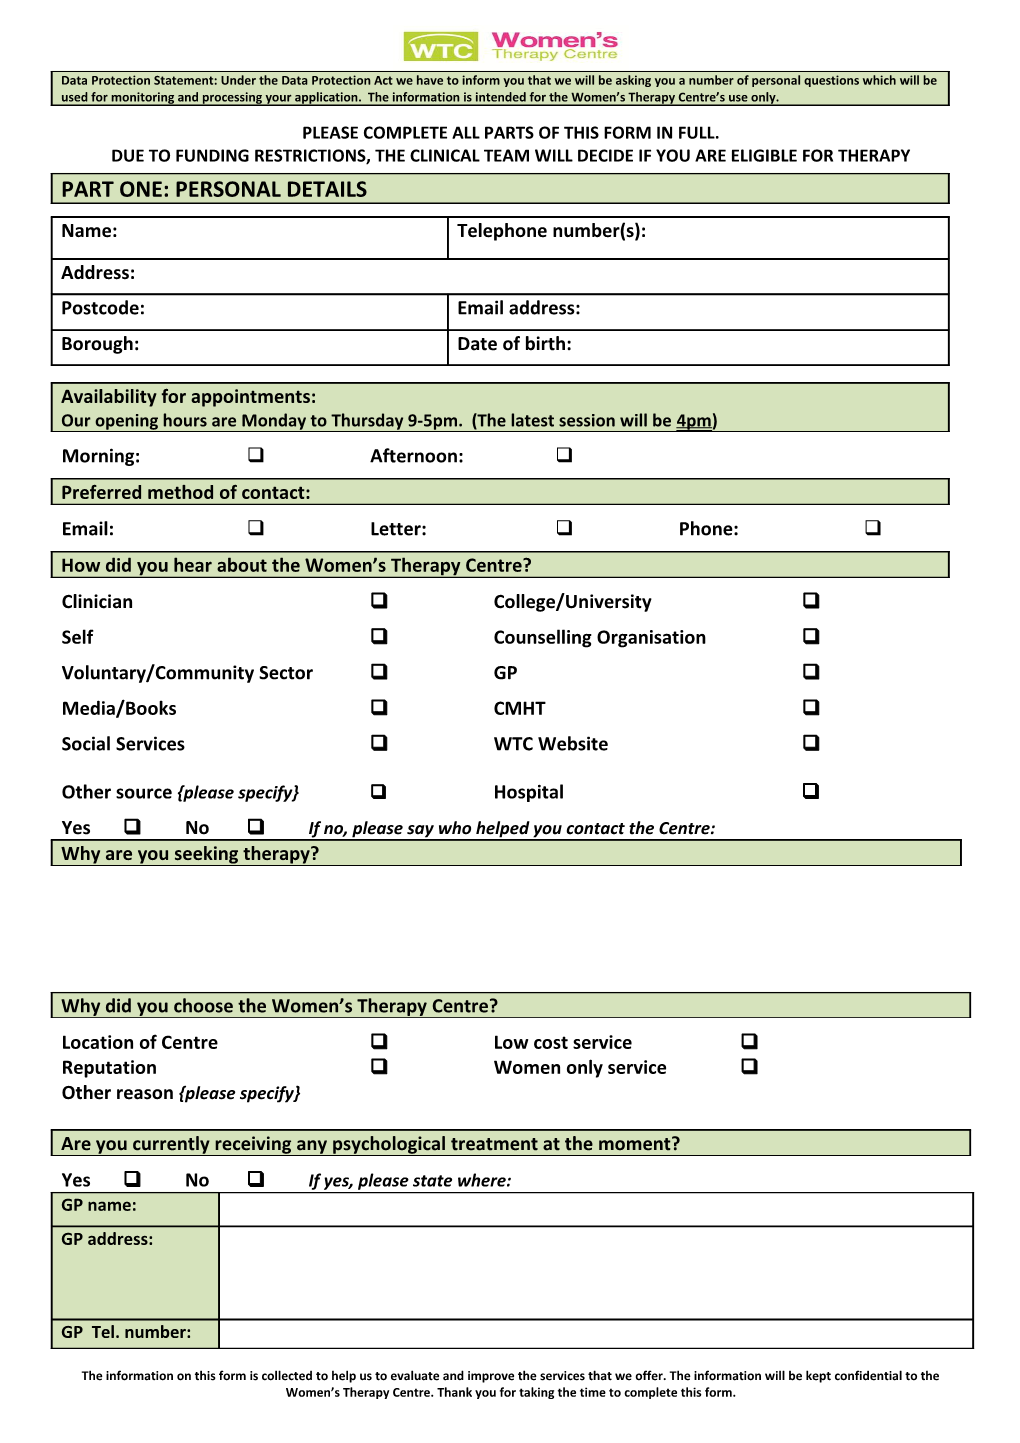 Please Complete All Parts of This Form in Full